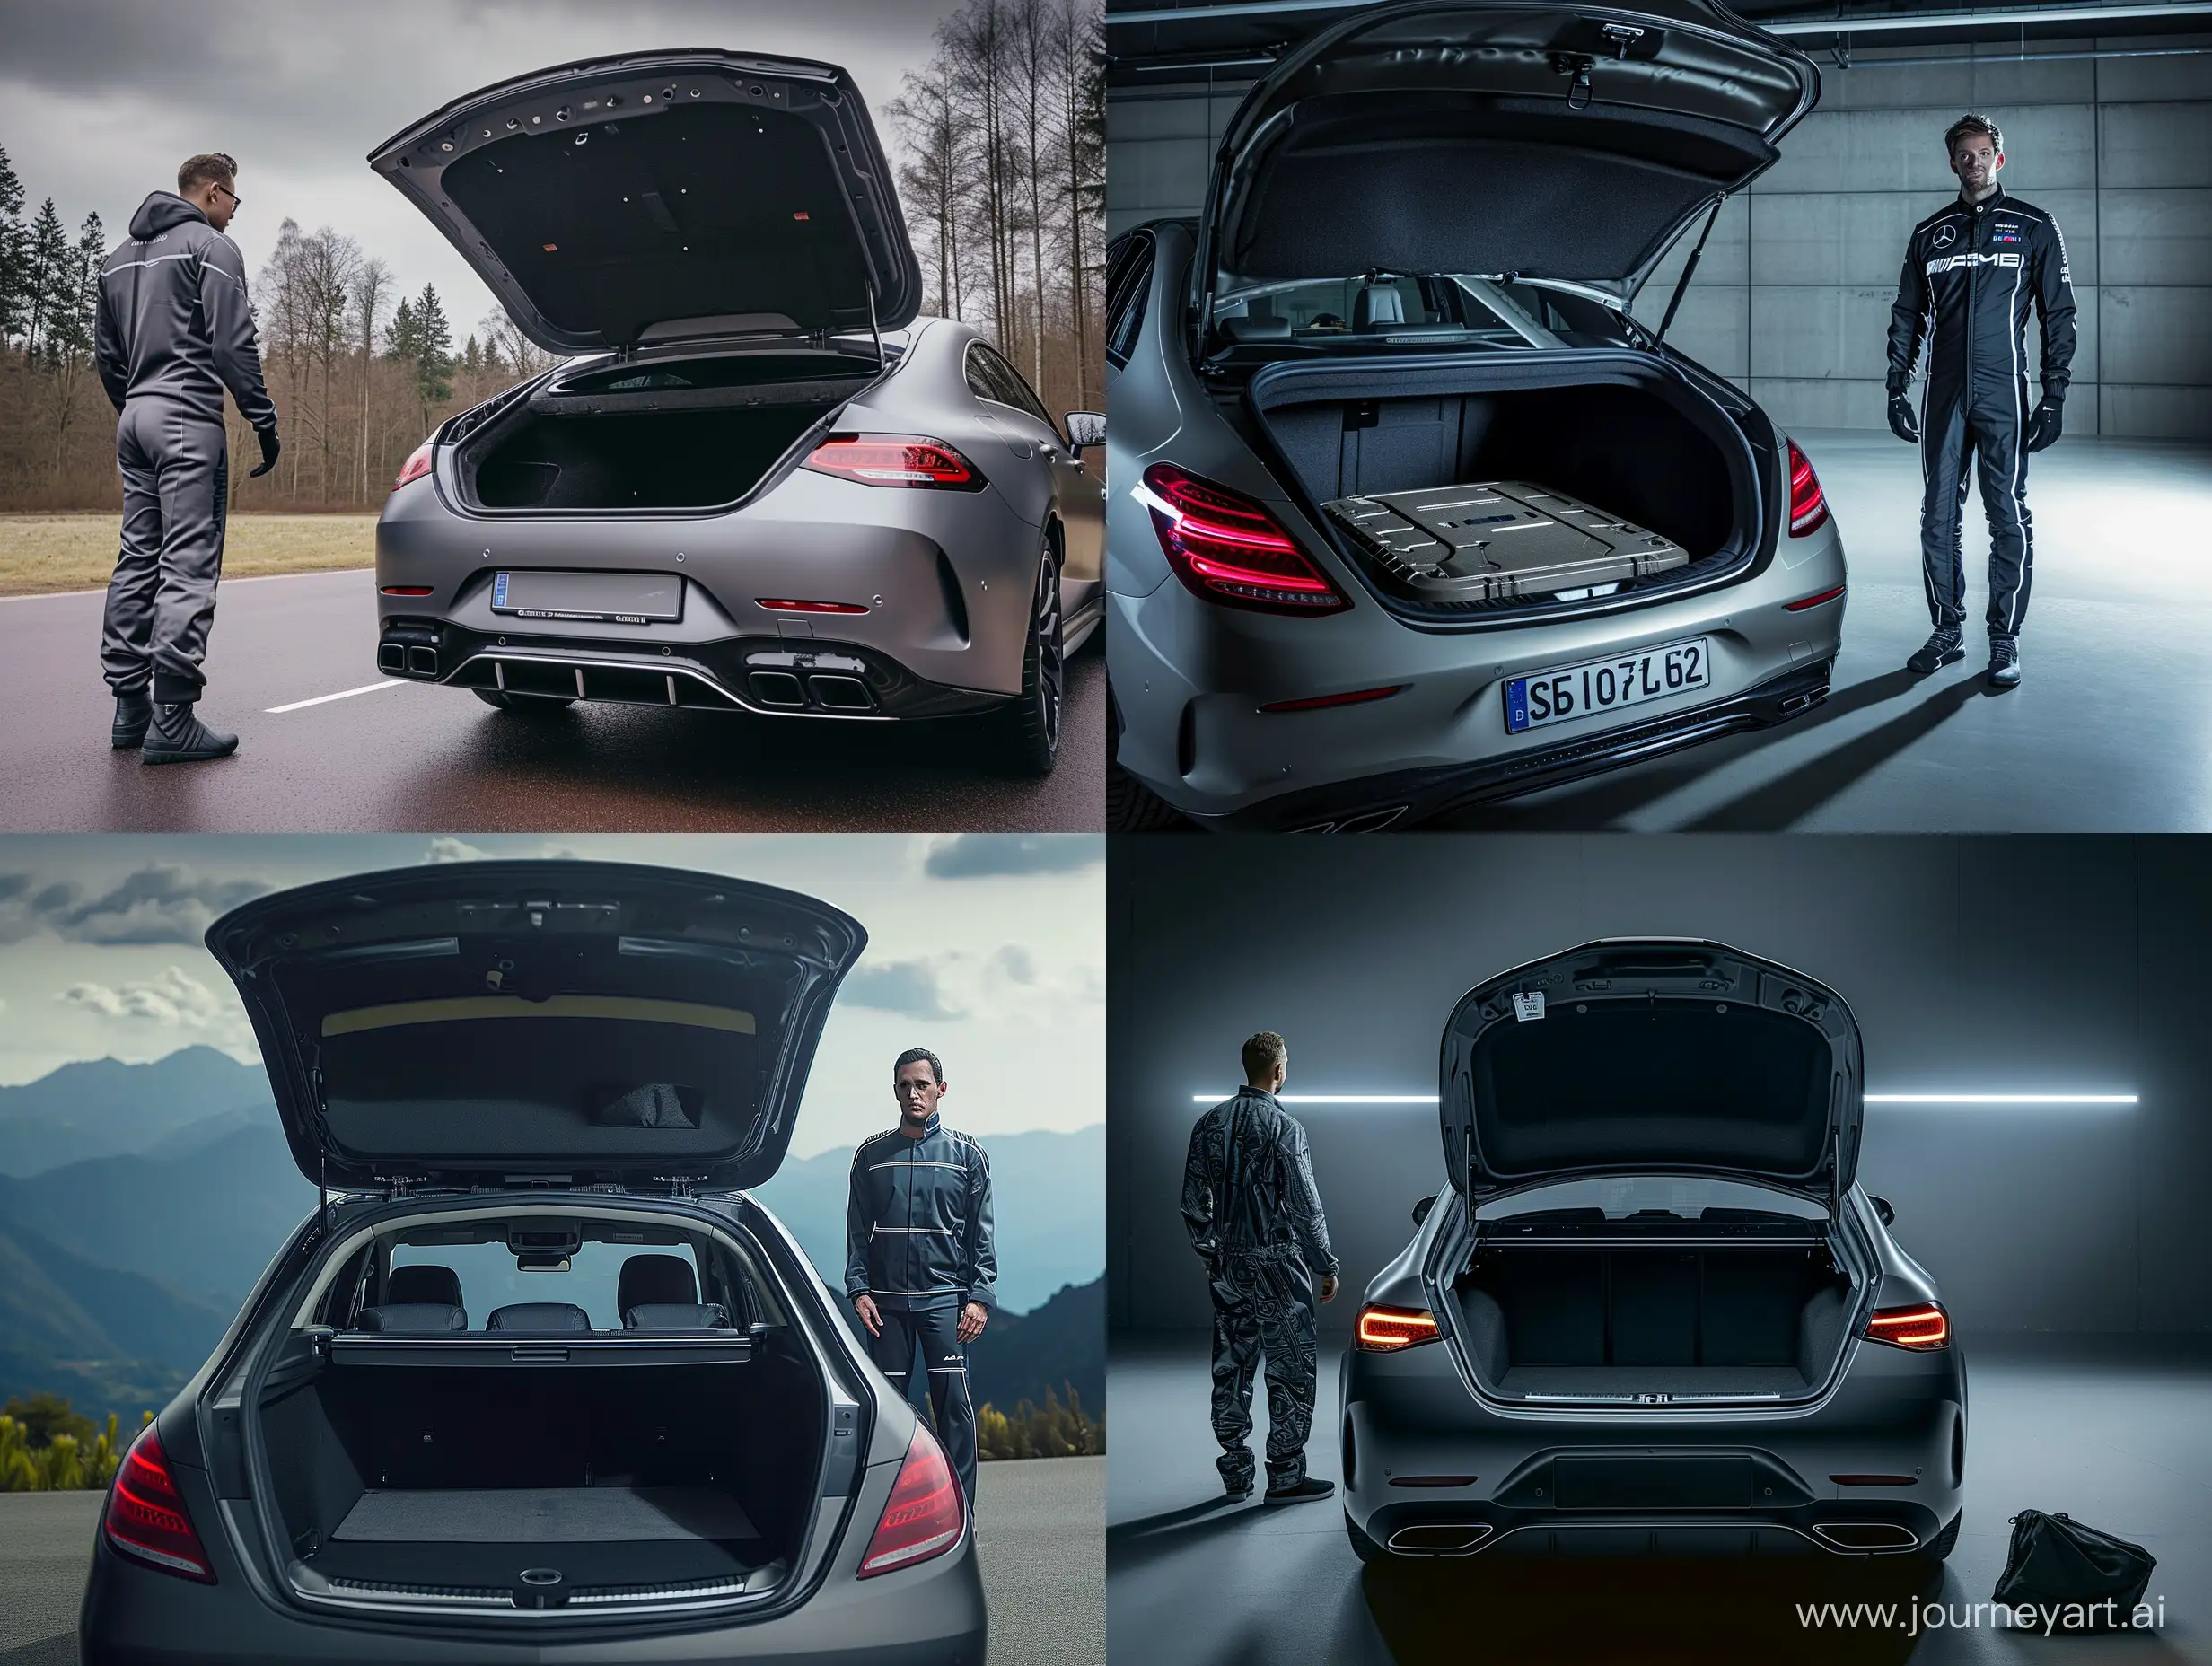 Promotional-Photo-Man-in-Suit-Beside-Open-Trunk-of-Mercedes-V6